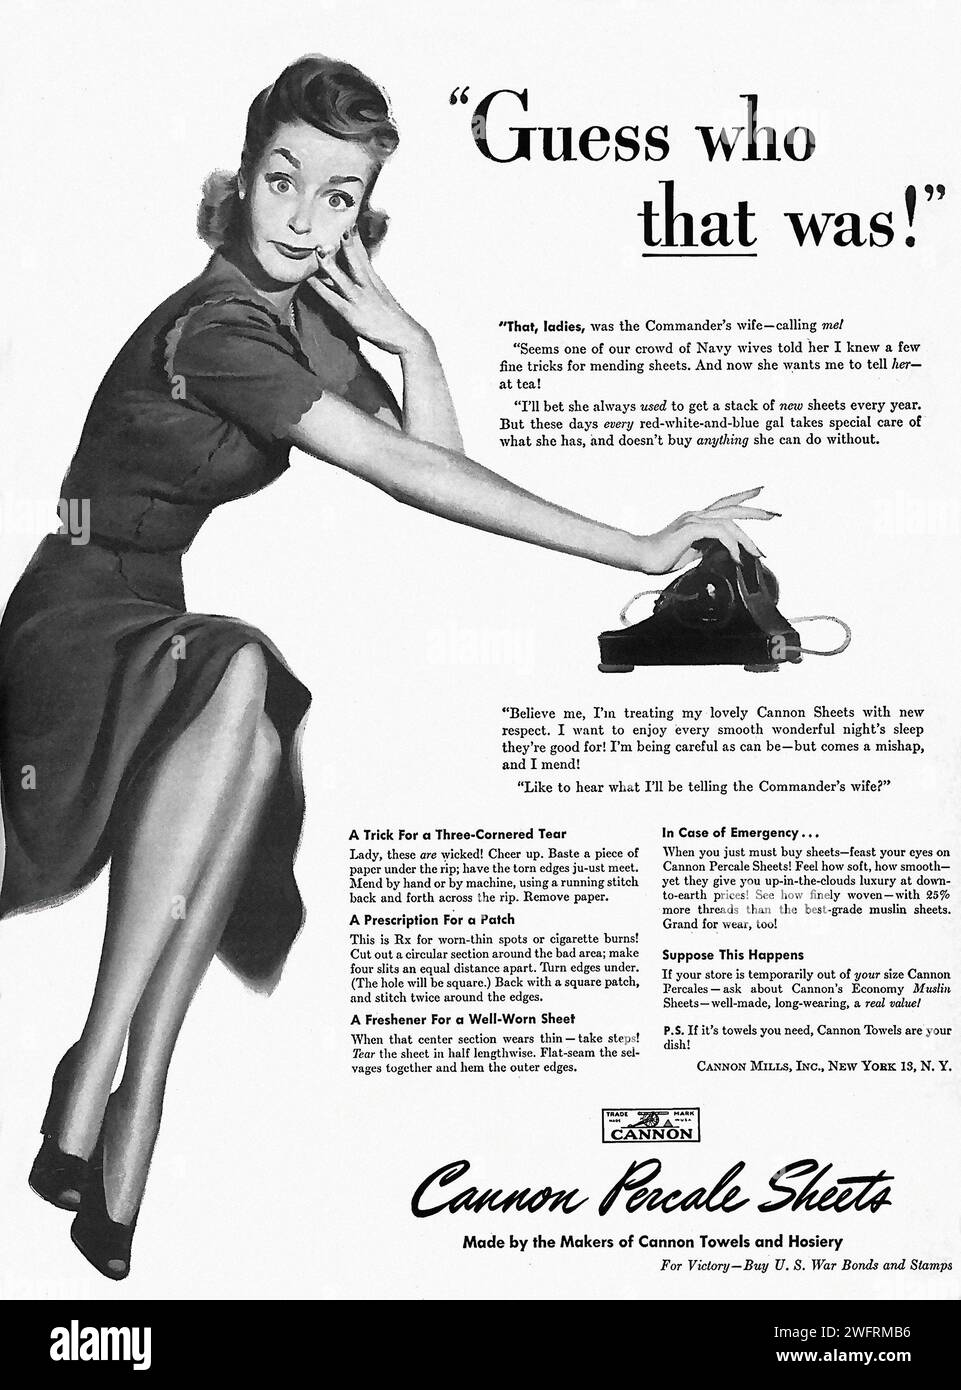 “GUESS WHO THAT WAS!” “BELIEVE IT, TRUSTING MY LOVELY CANNON SHEER HOSIERY WAS A TRICK FOR THREE - CANNON TOWELS, CANNON HOSIERY, AND ME!”  This is a black and white advertisement for Cannon Towels and Hosiery, dating back to the World War II era. The advertisement features a woman wearing a black dress and white heels, standing on one leg with the other bent at the knee. The text on the advertisement discusses the features and benefits of the products, such as “A Trick for Three - Cannon Towels, Cannon Hosiery, and me!” and “A Pinchproof Heel for a Perfect Fit”. The graphic style of the image Stock Photo